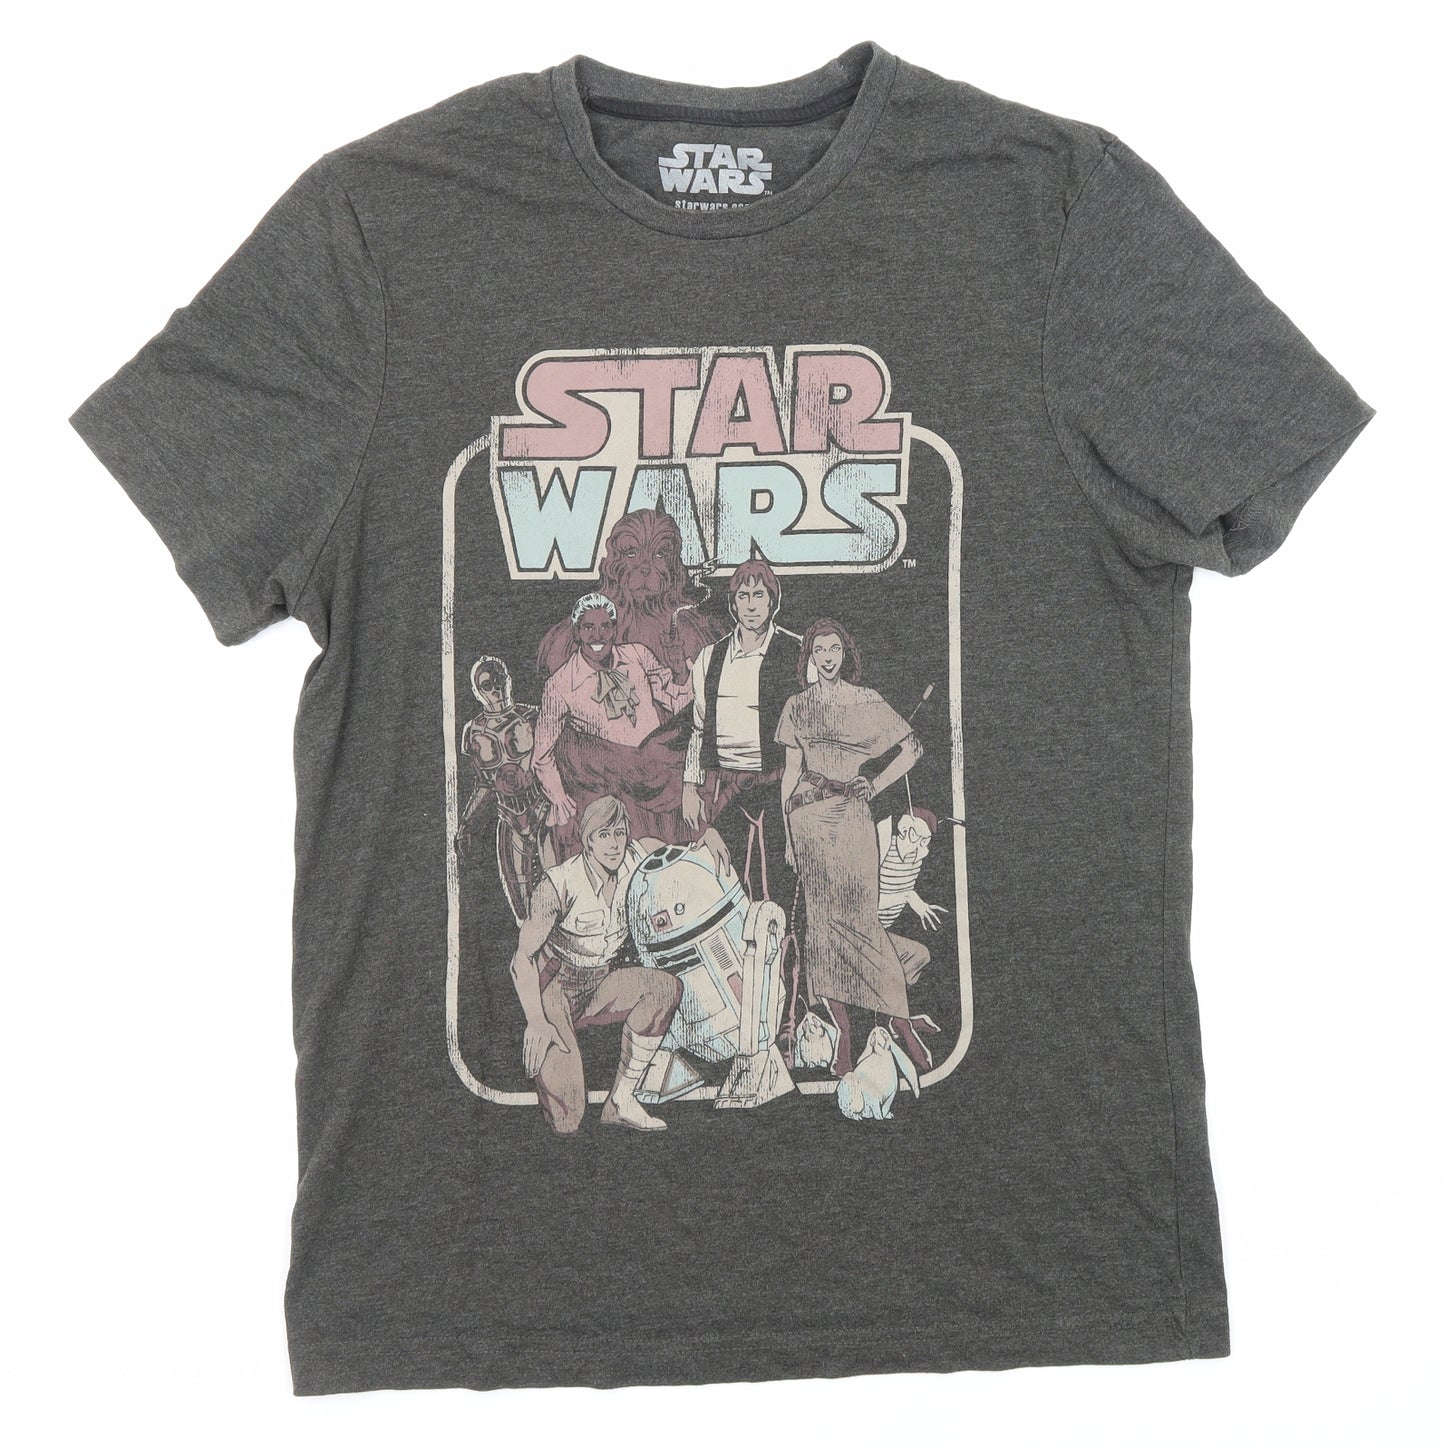 Star Wars Mens Grey Cotton T-Shirt Size S Crew Neck - Star Wars Character